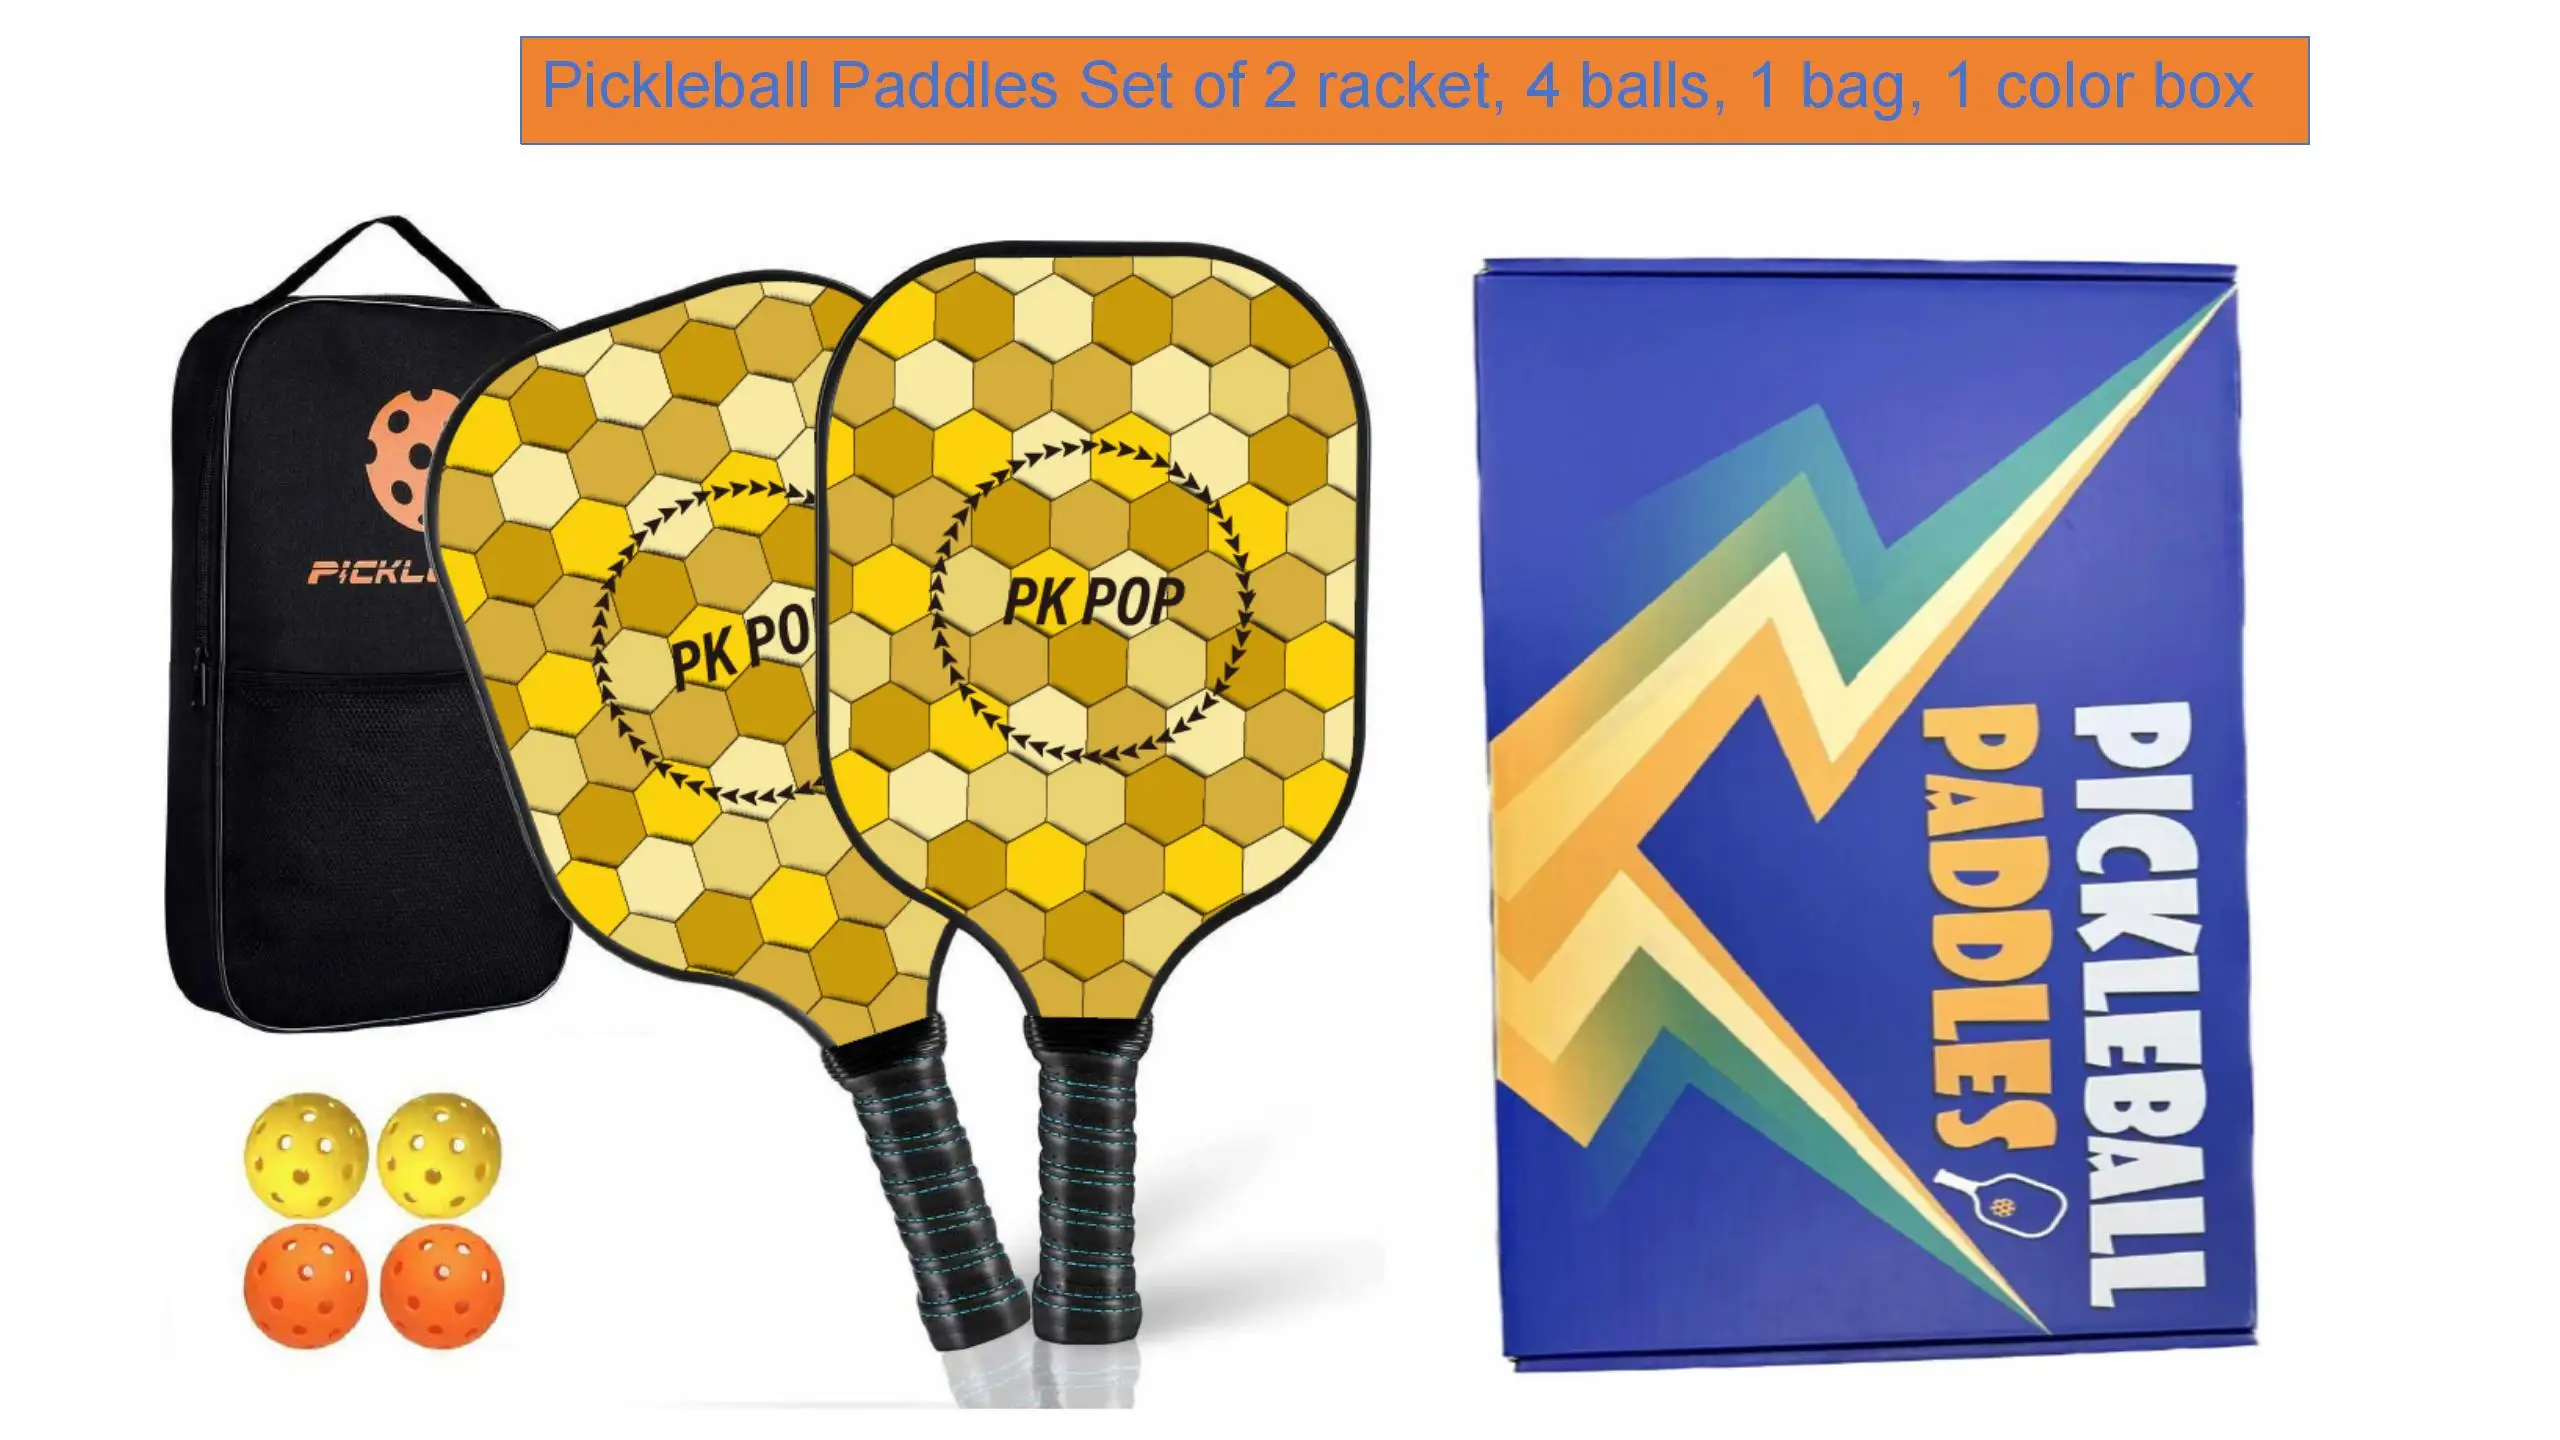 

Gift Racket Pickleball Paddle Set, Equipment with 4 Balls, 2 Racquets with 1 Carry Bag and a Color Box